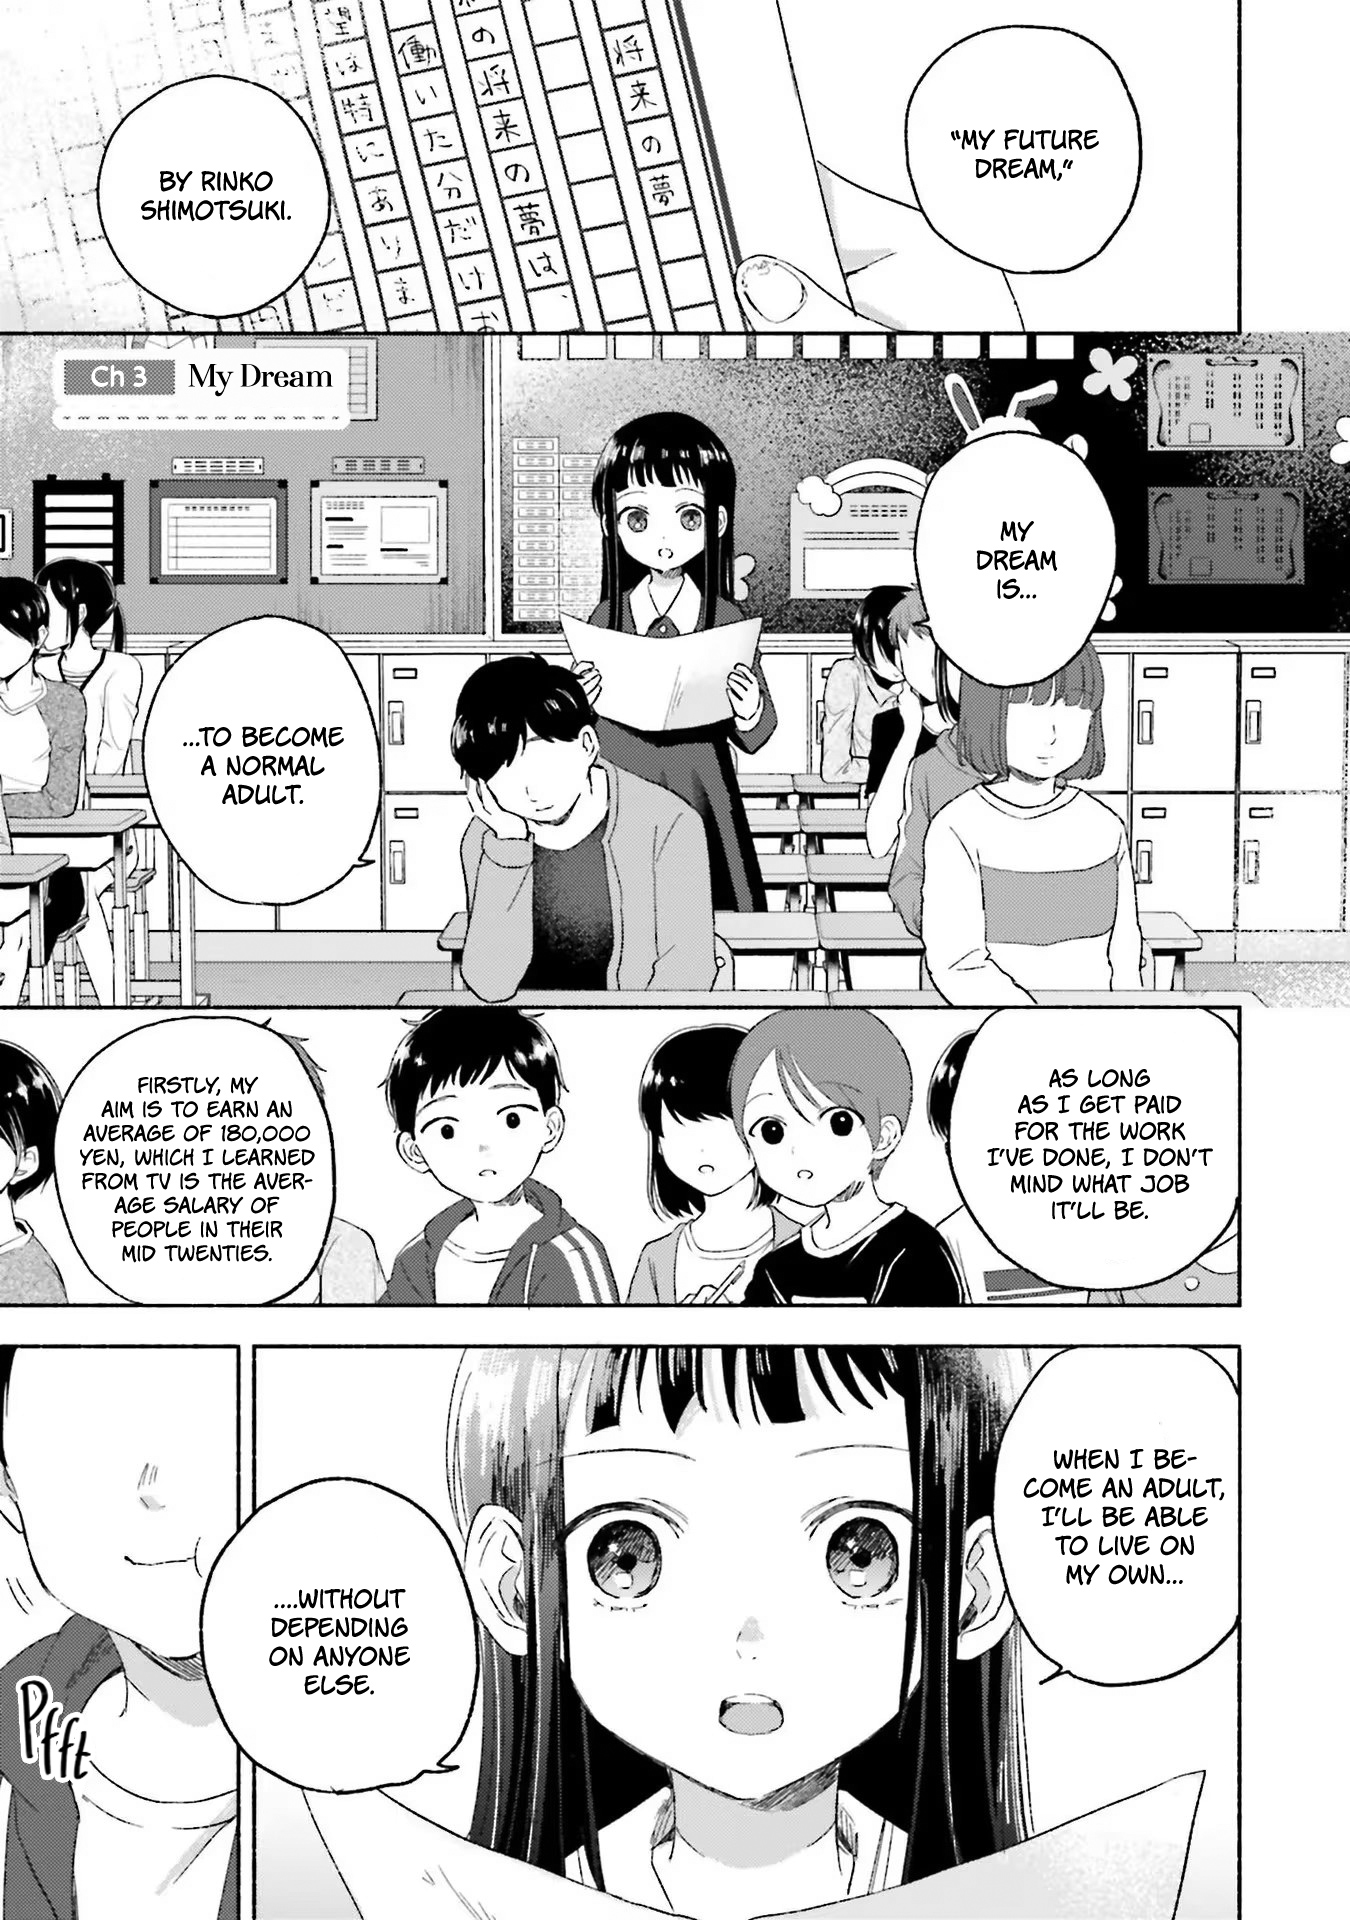 Rinko-Chan To Himosugara Vol.1 Chapter 3: My Future Dream - Picture 1